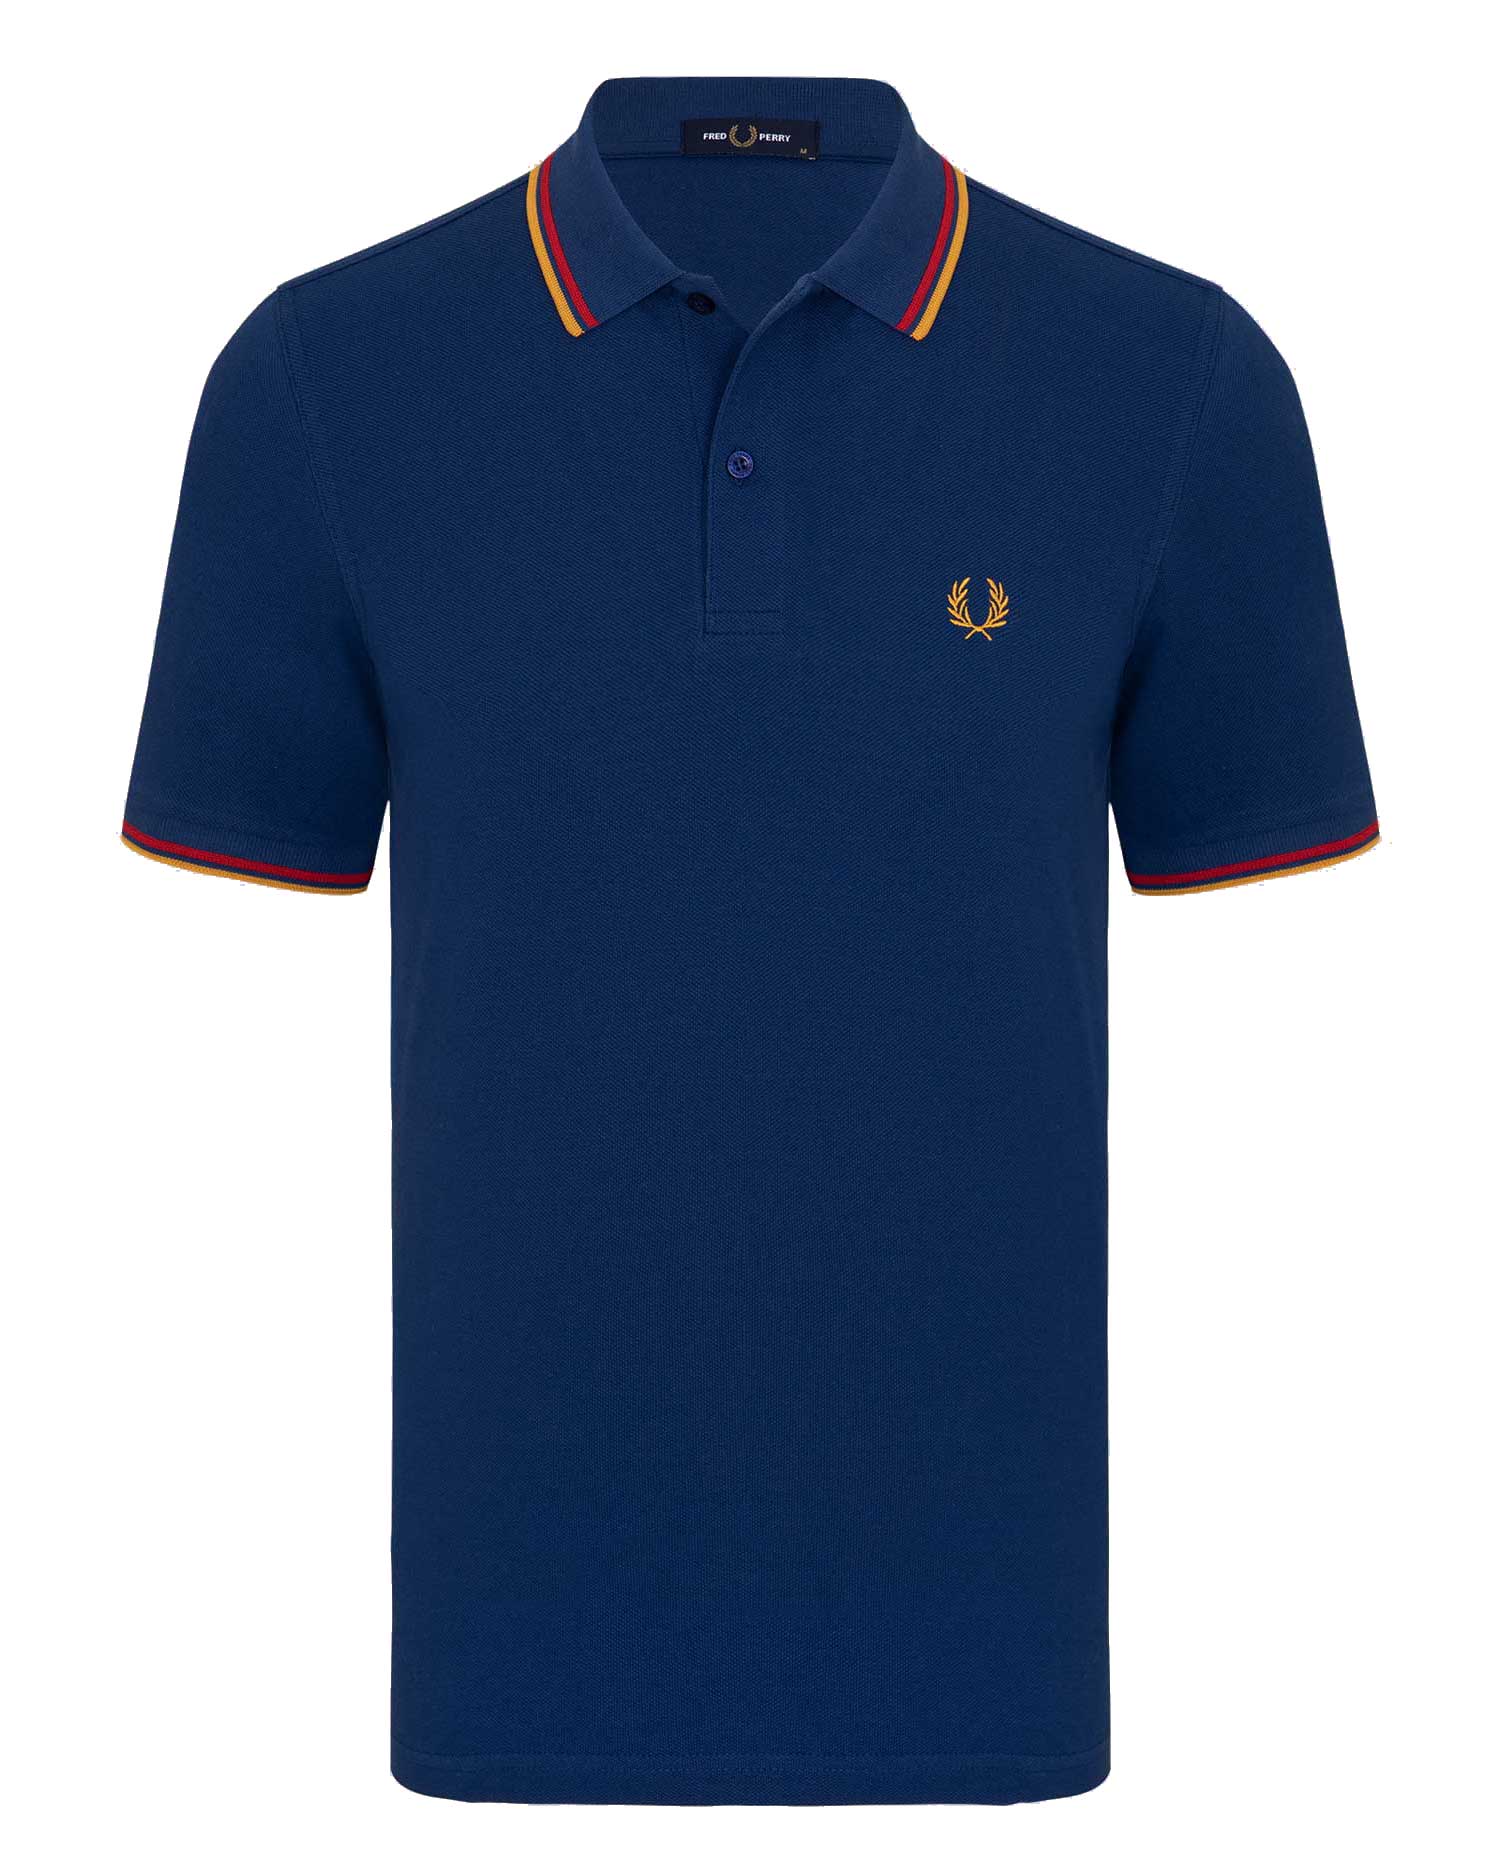 POLO FRED PERRY - COBALT/ORANGE